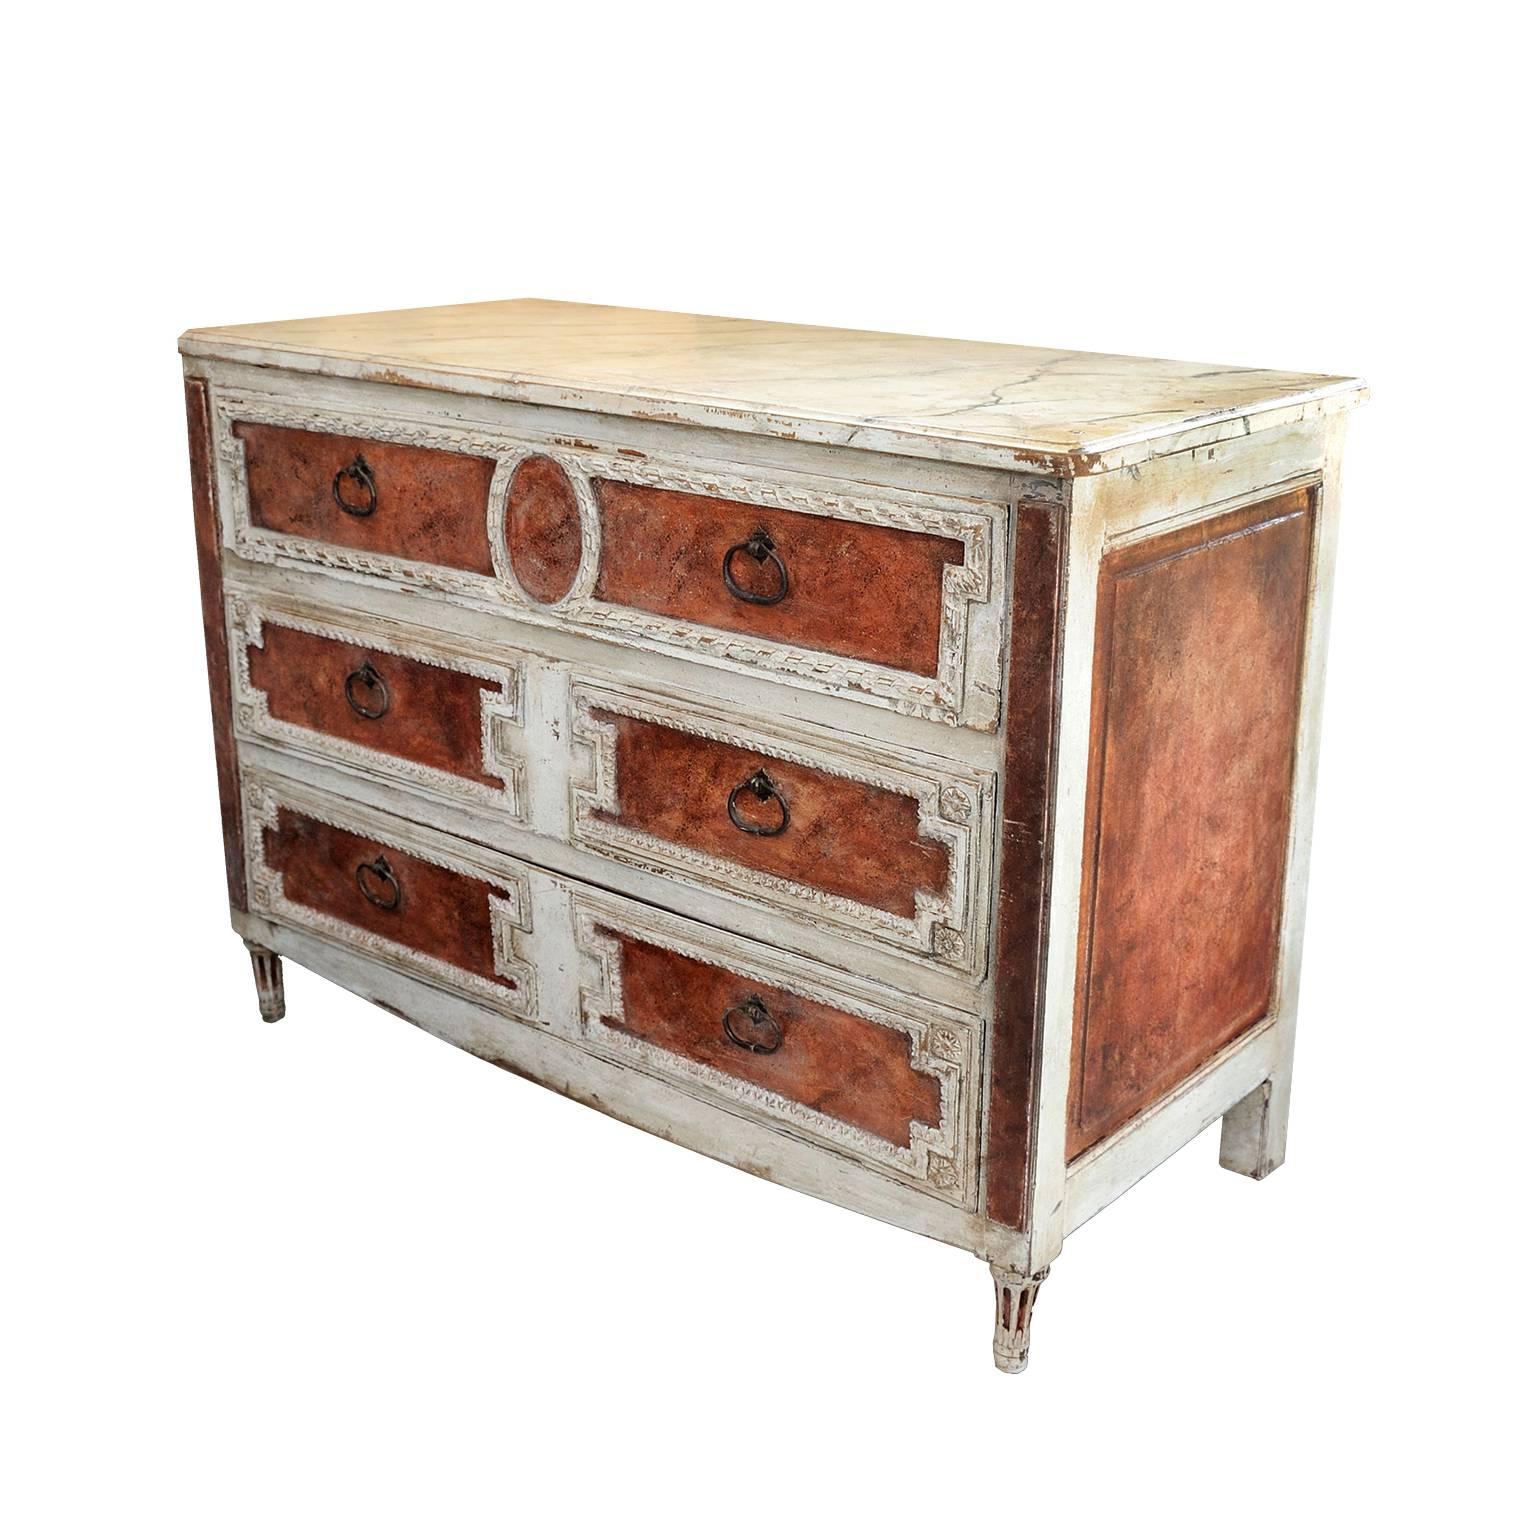 This is a superb late 18th century Italian neoclassical painted faux porphyry and Carrara marble Italian commode or chest of drawers. This piece has three well-proportioned drawers and has beautiful detailing to the drawer fronts and legs, circa